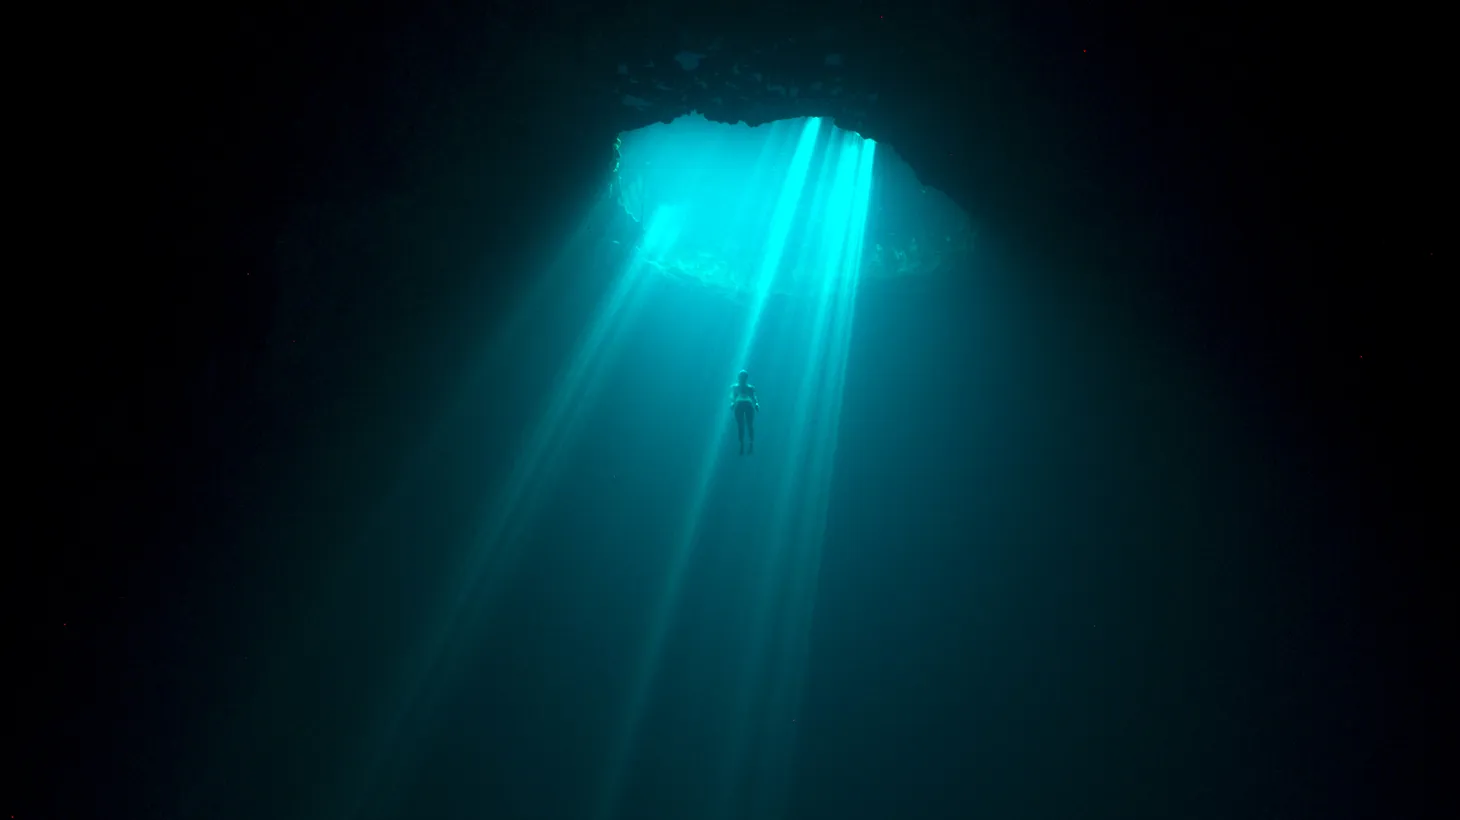 Freedivers swim hundreds of feet into total darkness, as the underwater pressure squeezes their lungs with 10 times the force they’d feel on the surface, explains Laura McGann.